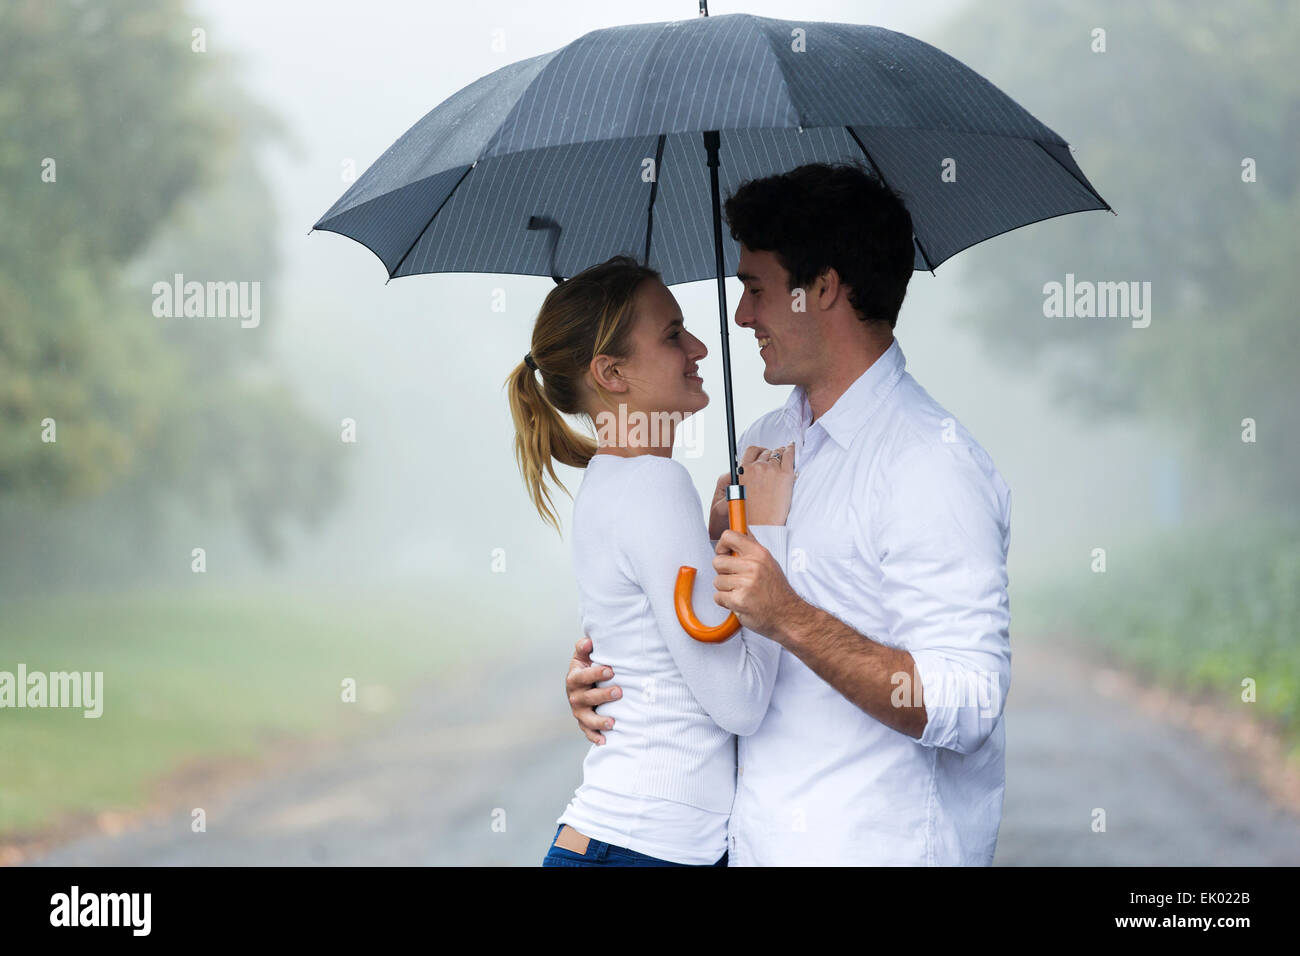 lovely young woman with boyfriend under an umbrella in the rain Stock Photo